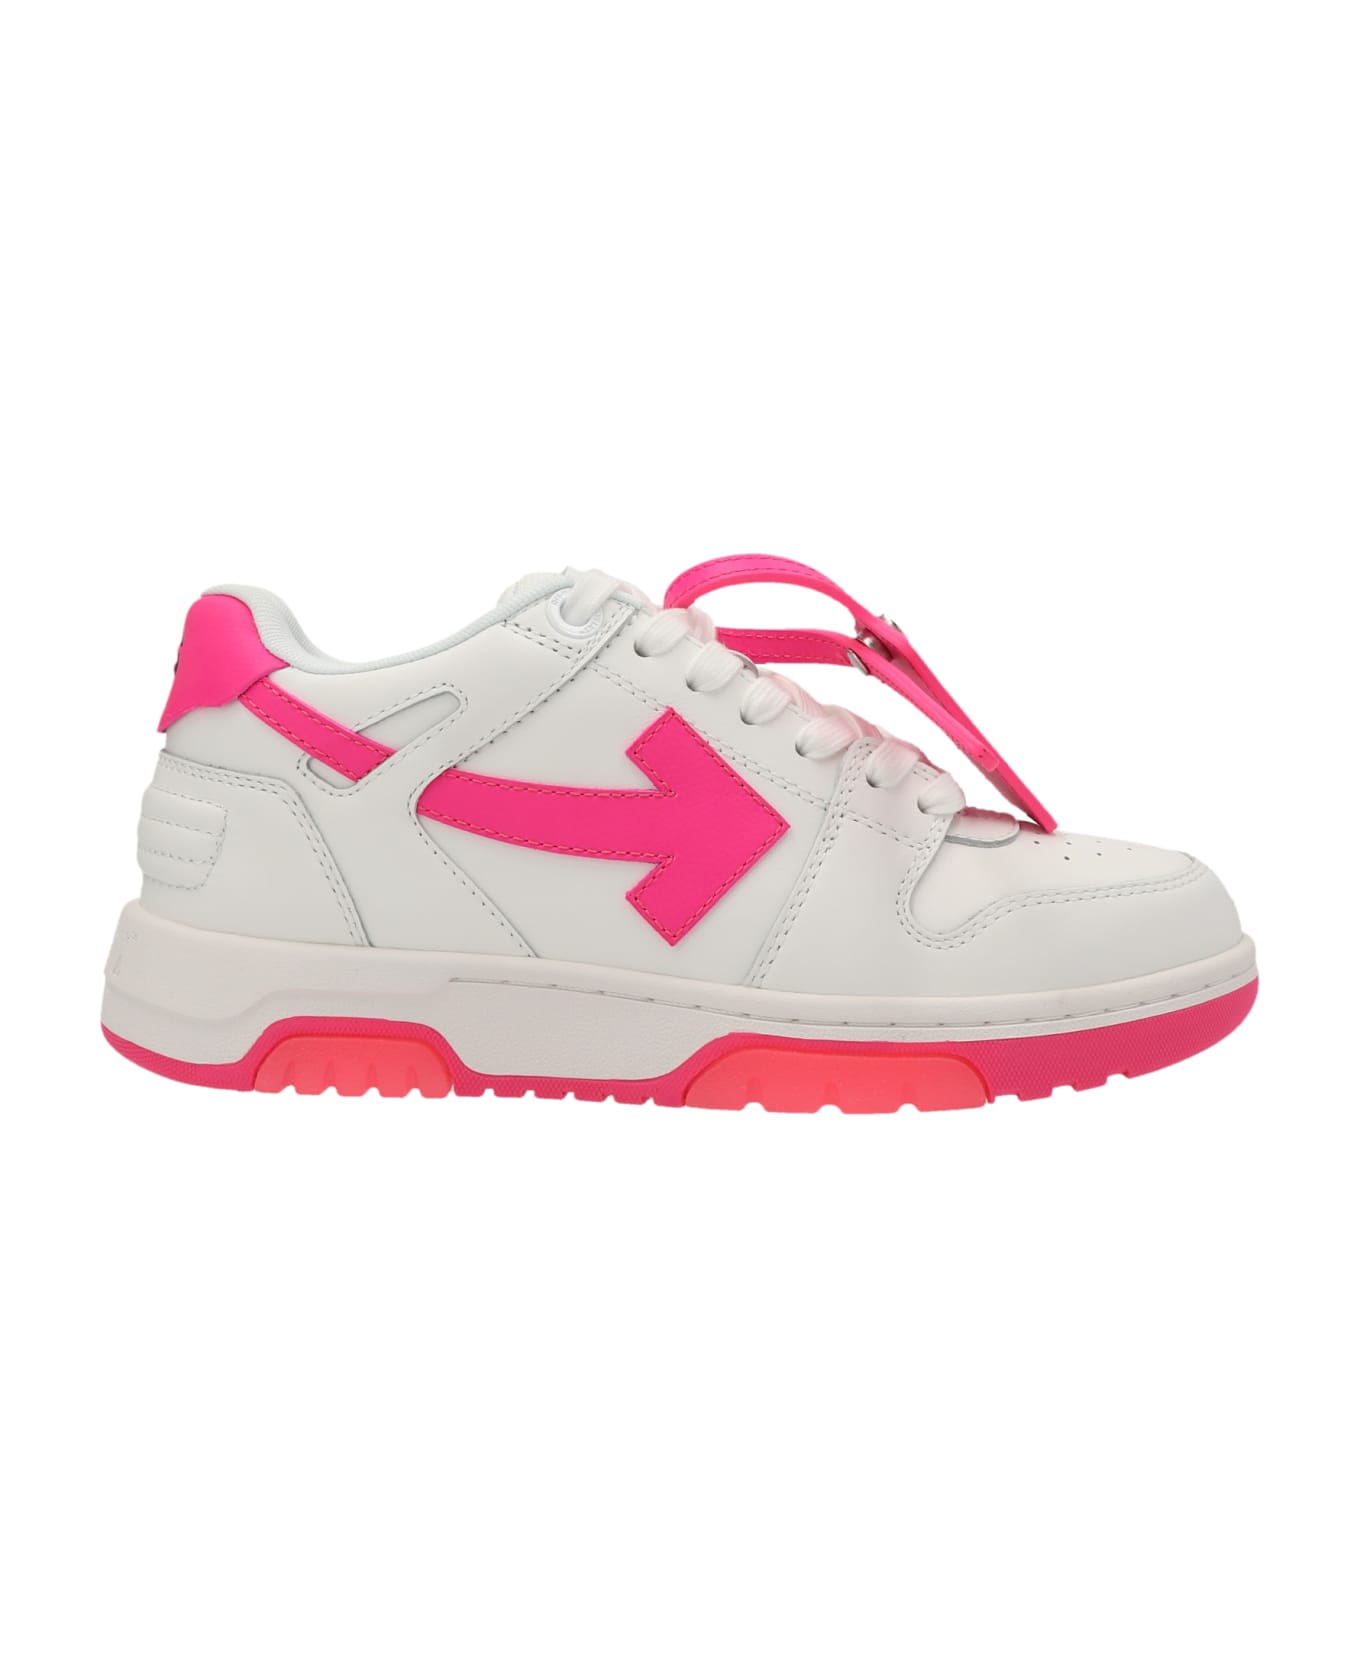 Off-White 'out Of Office' Sneakers - Fuchsia